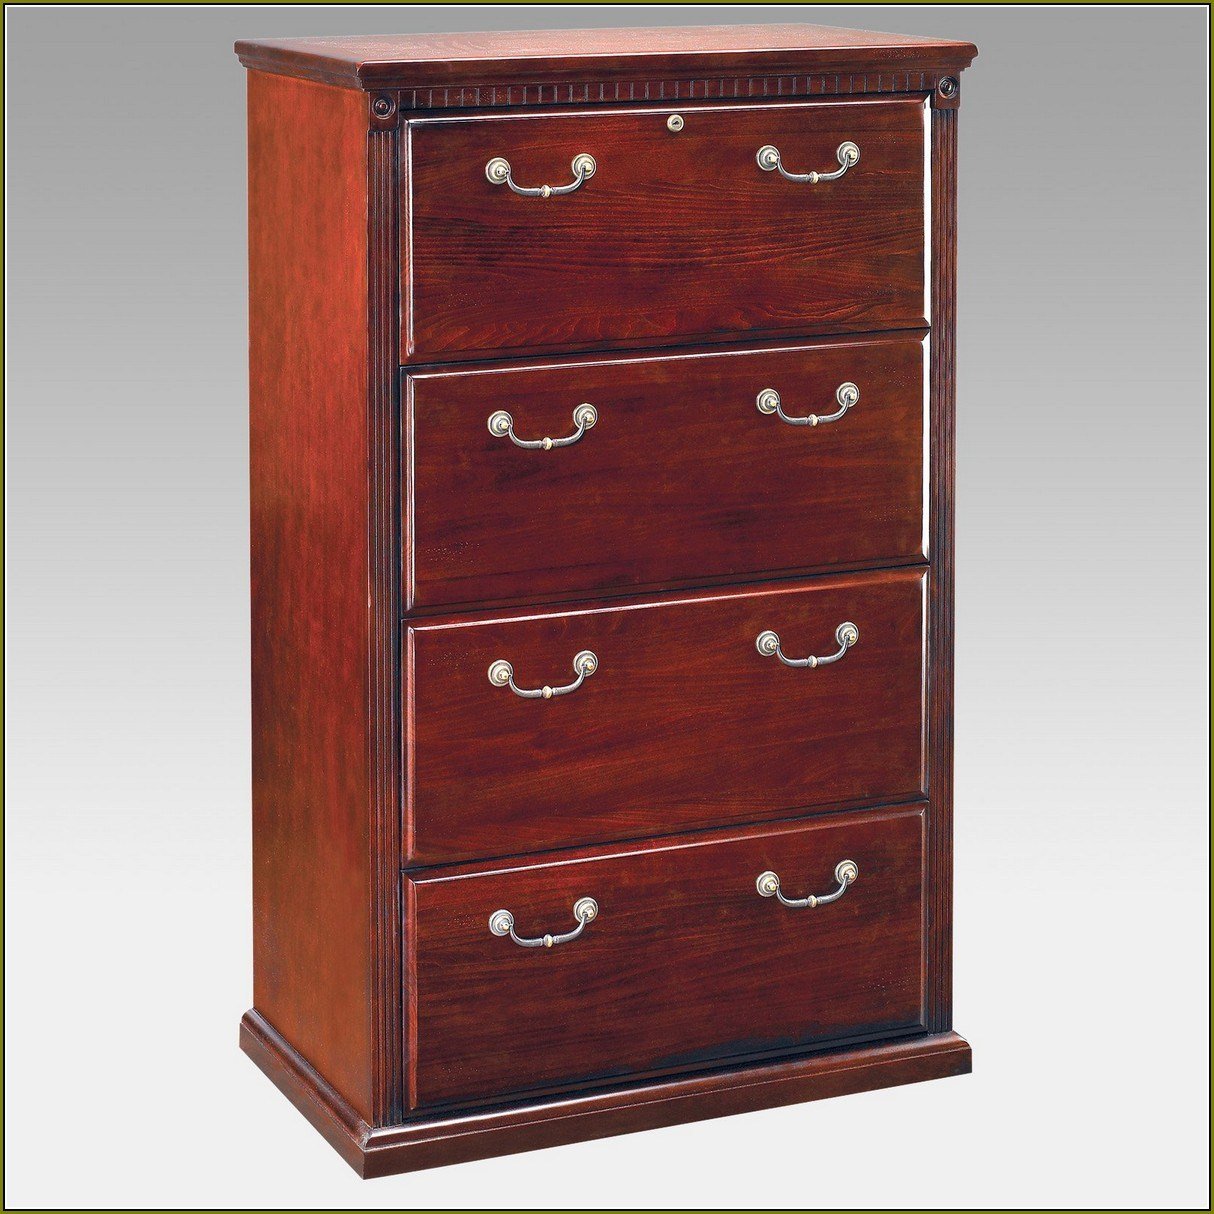 Uberraschend Black Wood File Cabinets Small Mahogany Plans Wooden intended for size 1214 X 1214